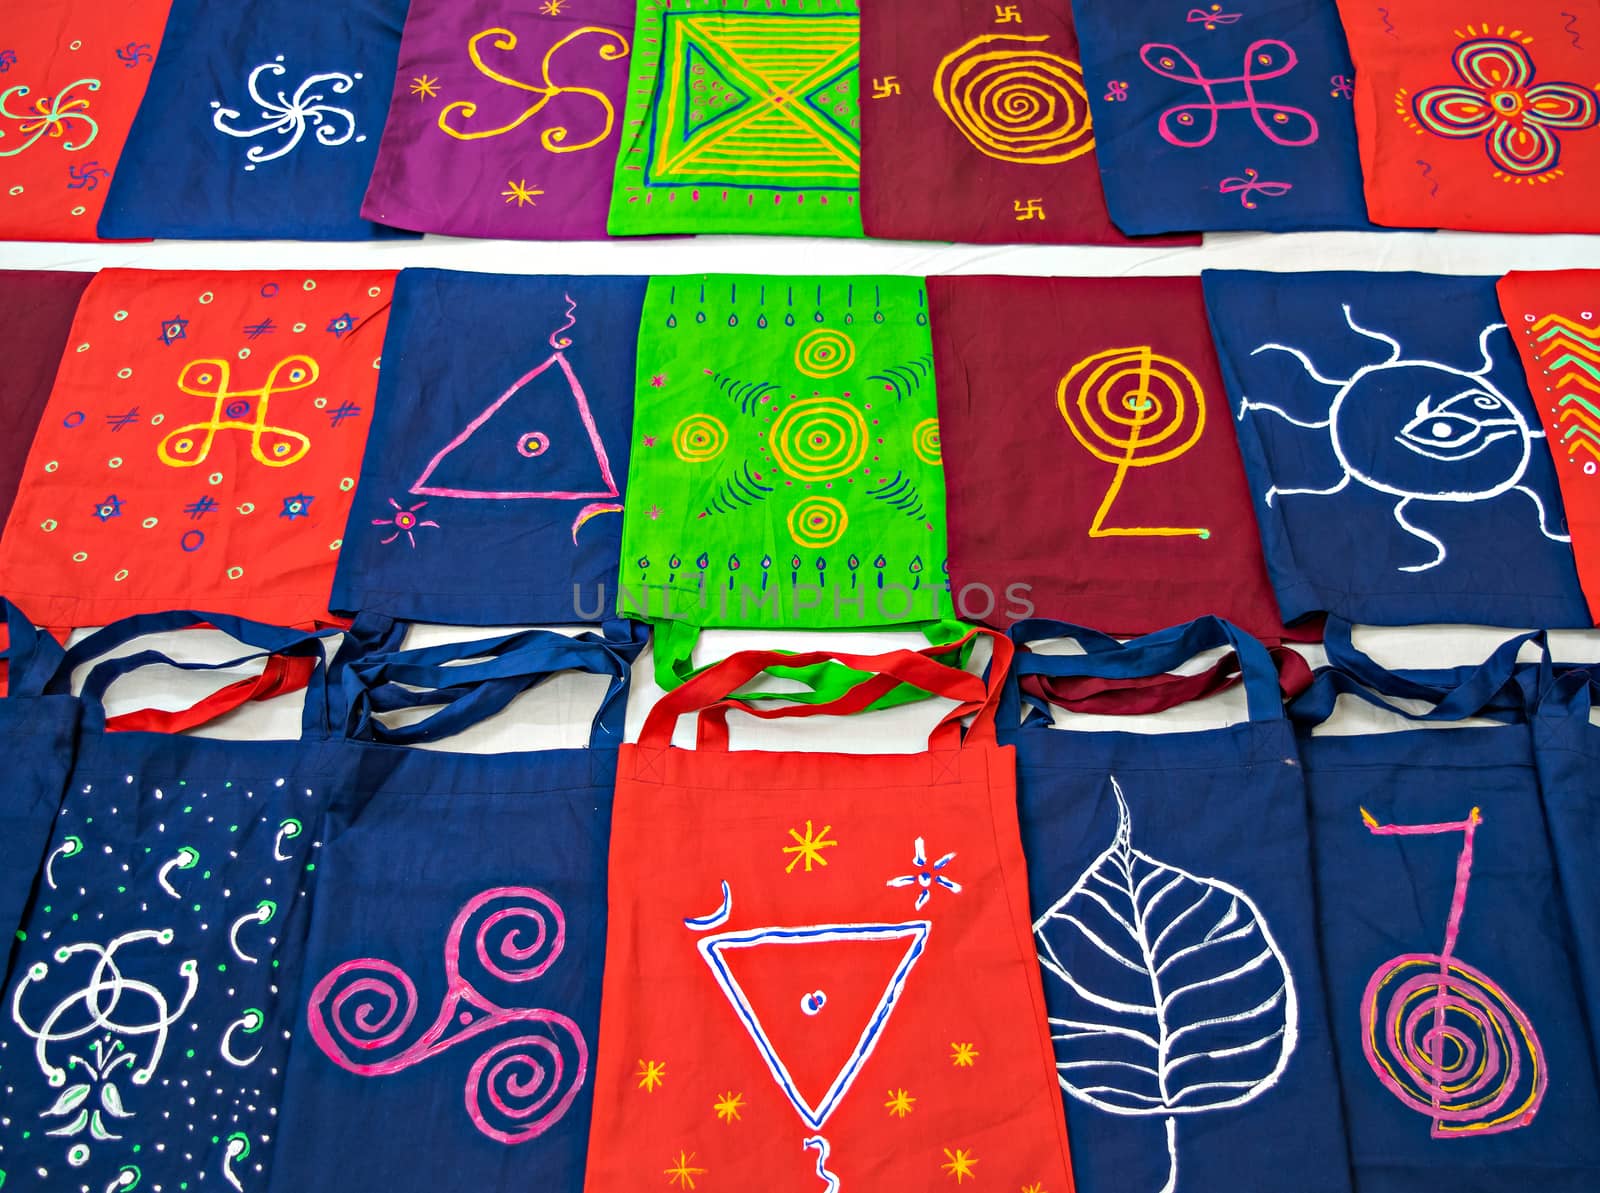 Colorful cotton bags with hand painted symbols arranged in pattern. Can be used as background.